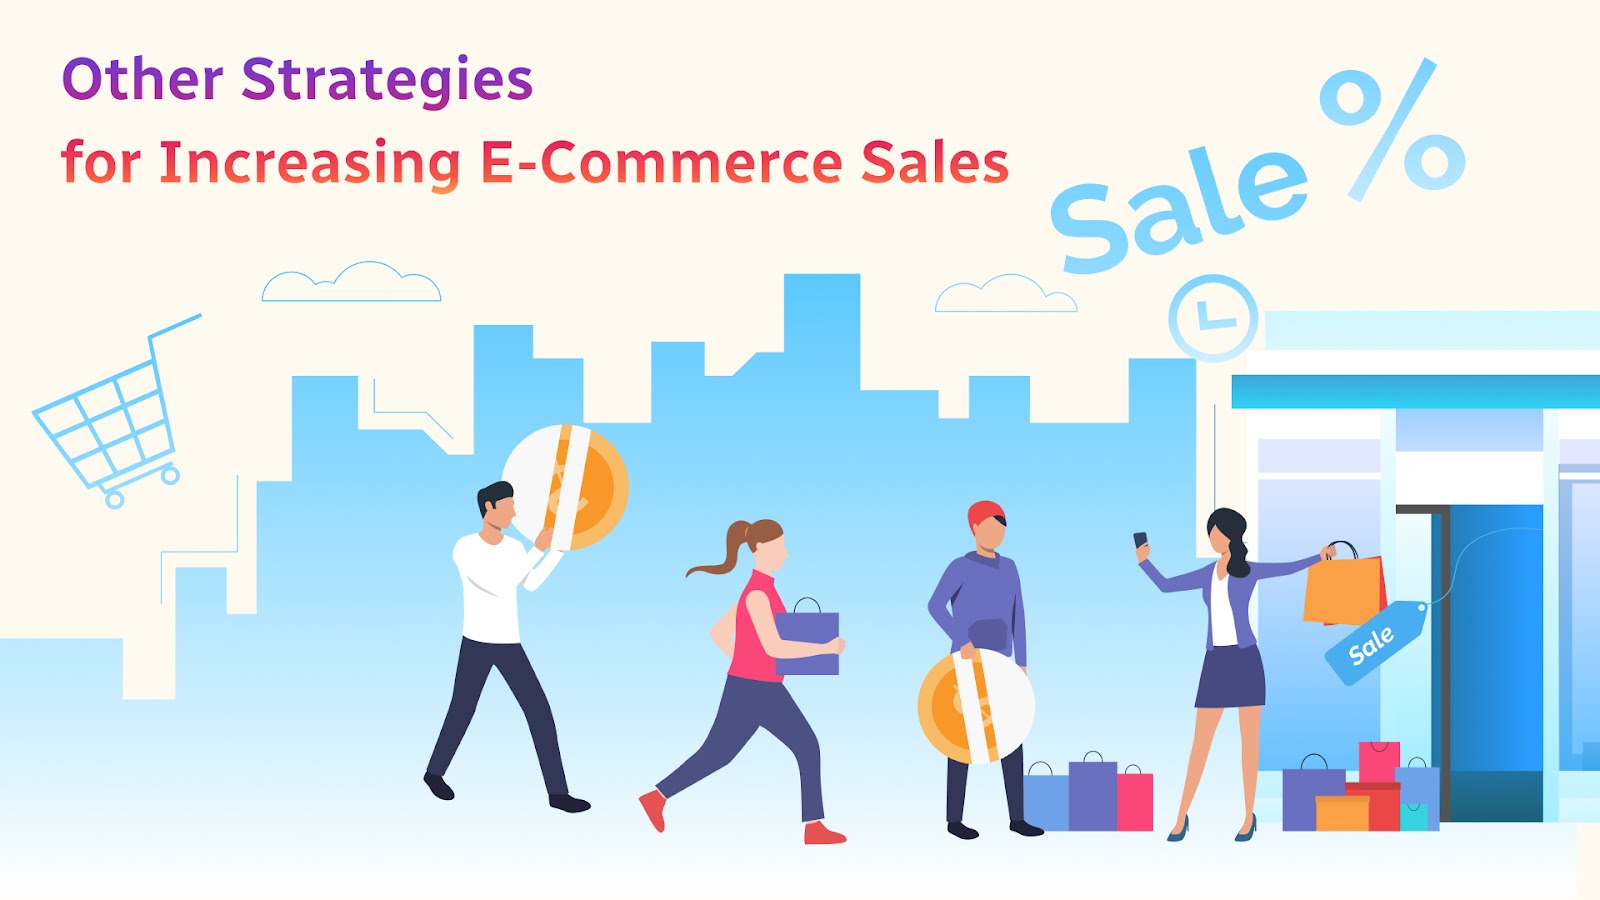 Other Strategies for Increasing E-Commerce Sales